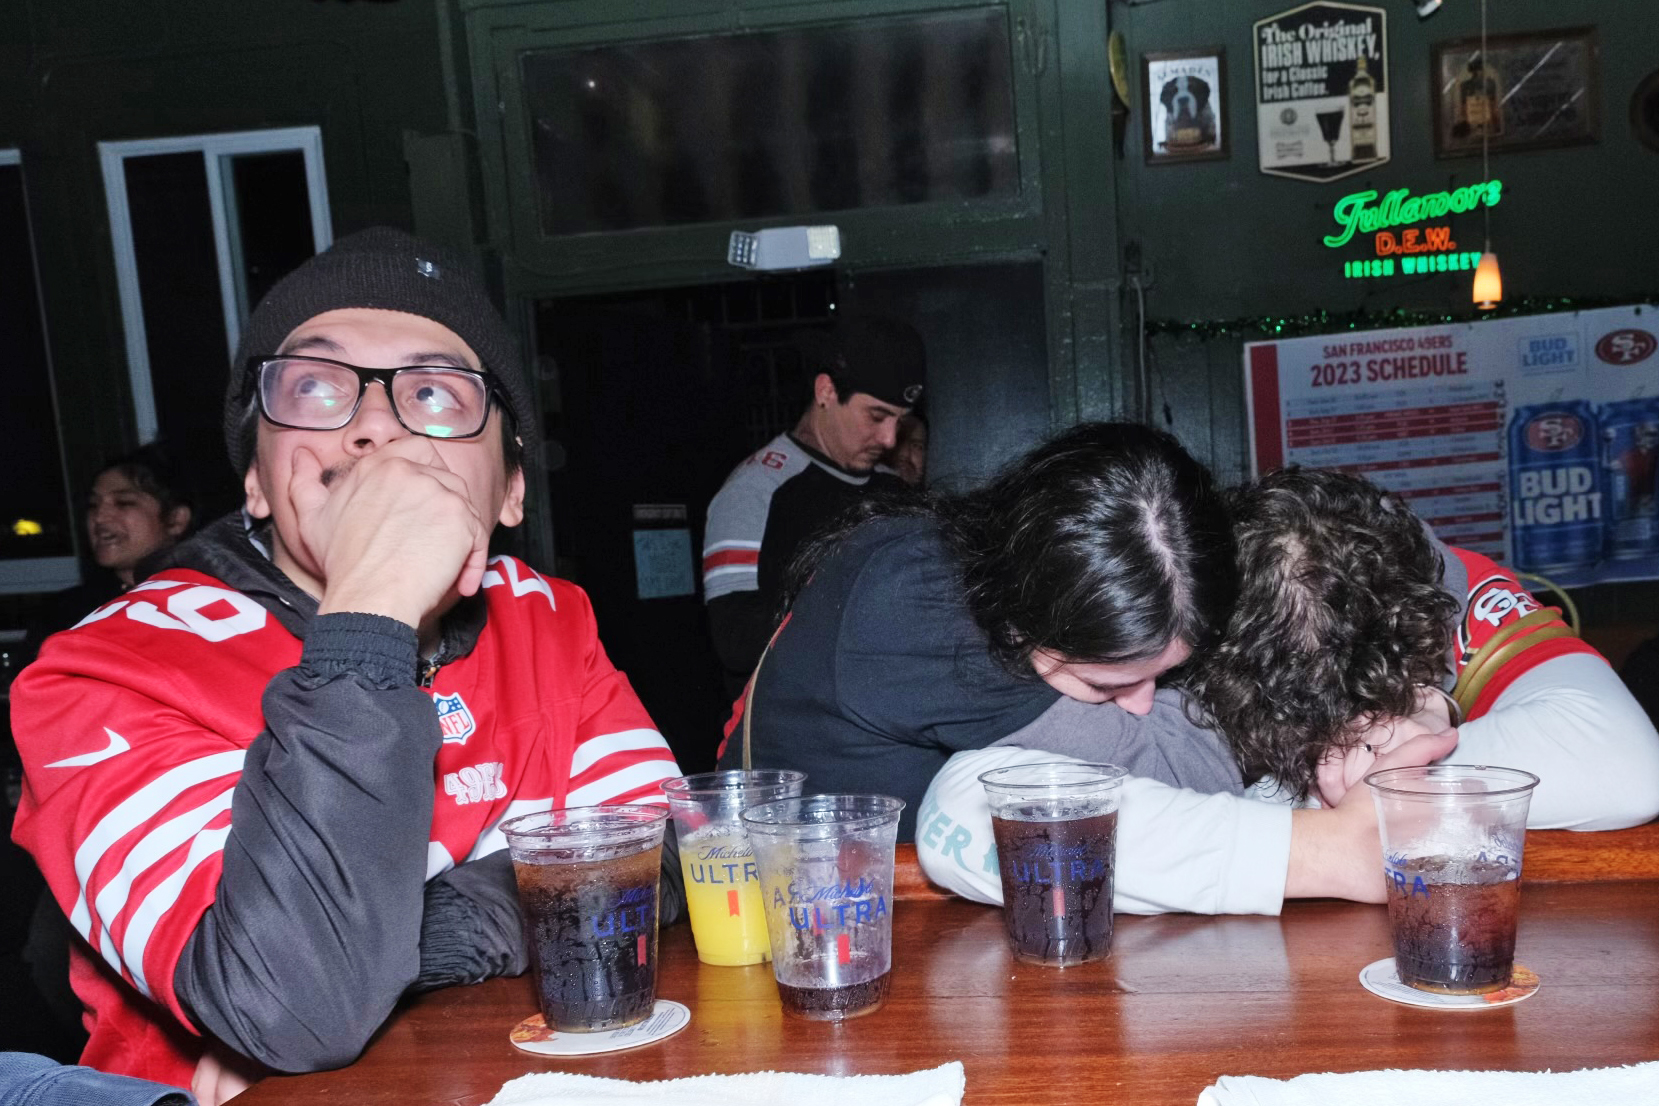 A tense moment at a sports bar: someone in a jersey looks shocked, while two others huddle, heads down. Drinks on the table suggest a social event.